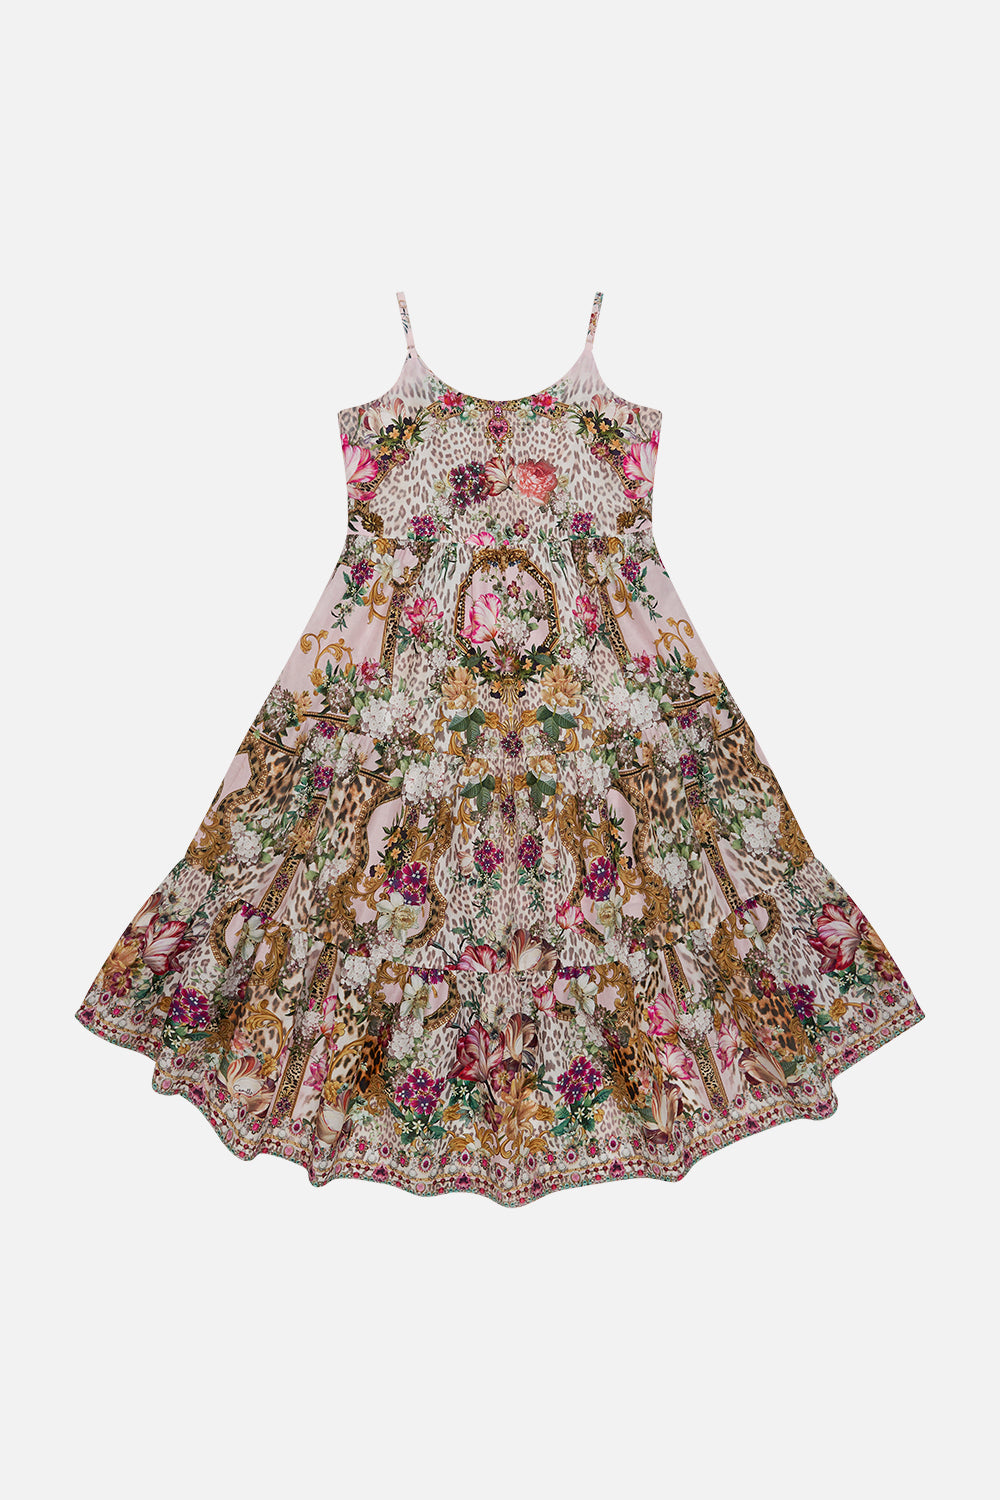 Product view of MILLA BY CAMILLA kids pink dress in Bambino Bliss print